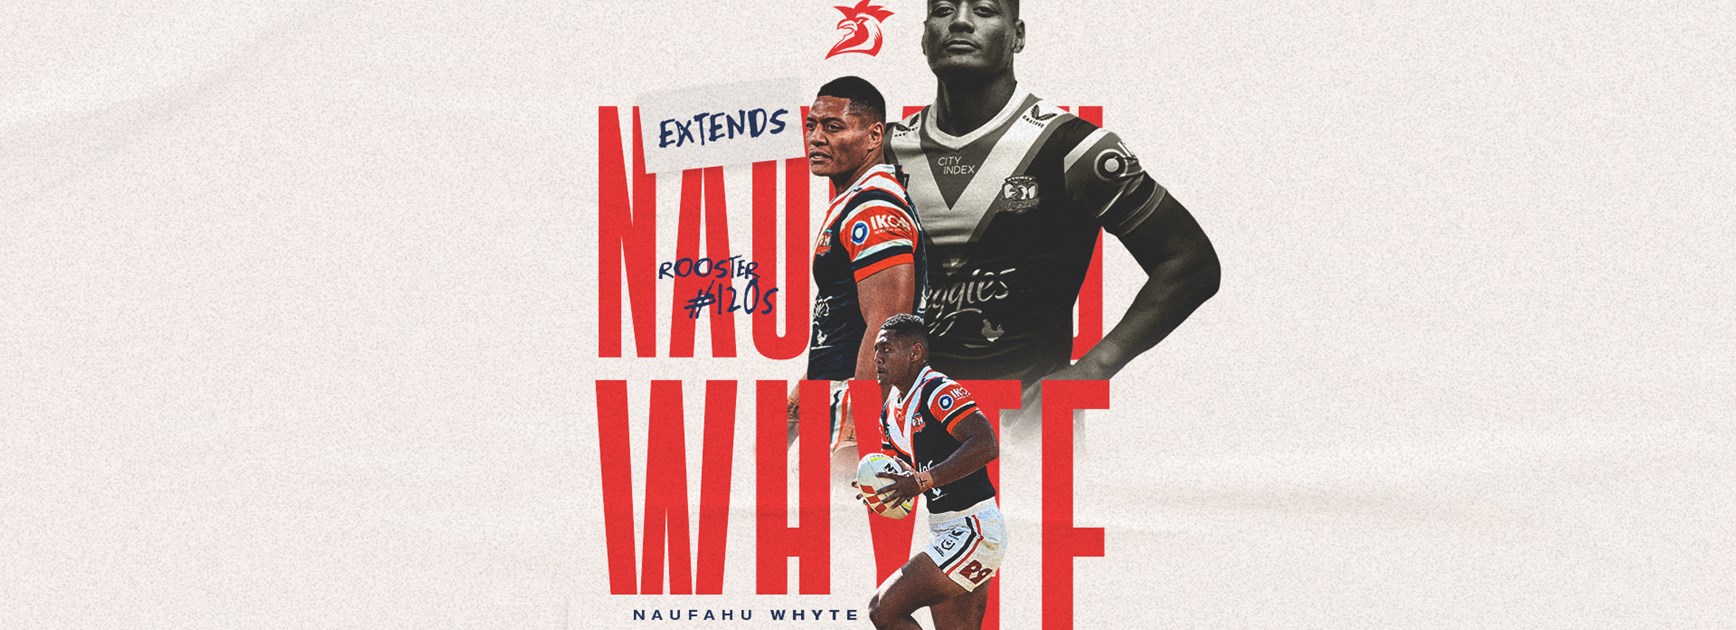 Naufahu Whyte signs two-year extension